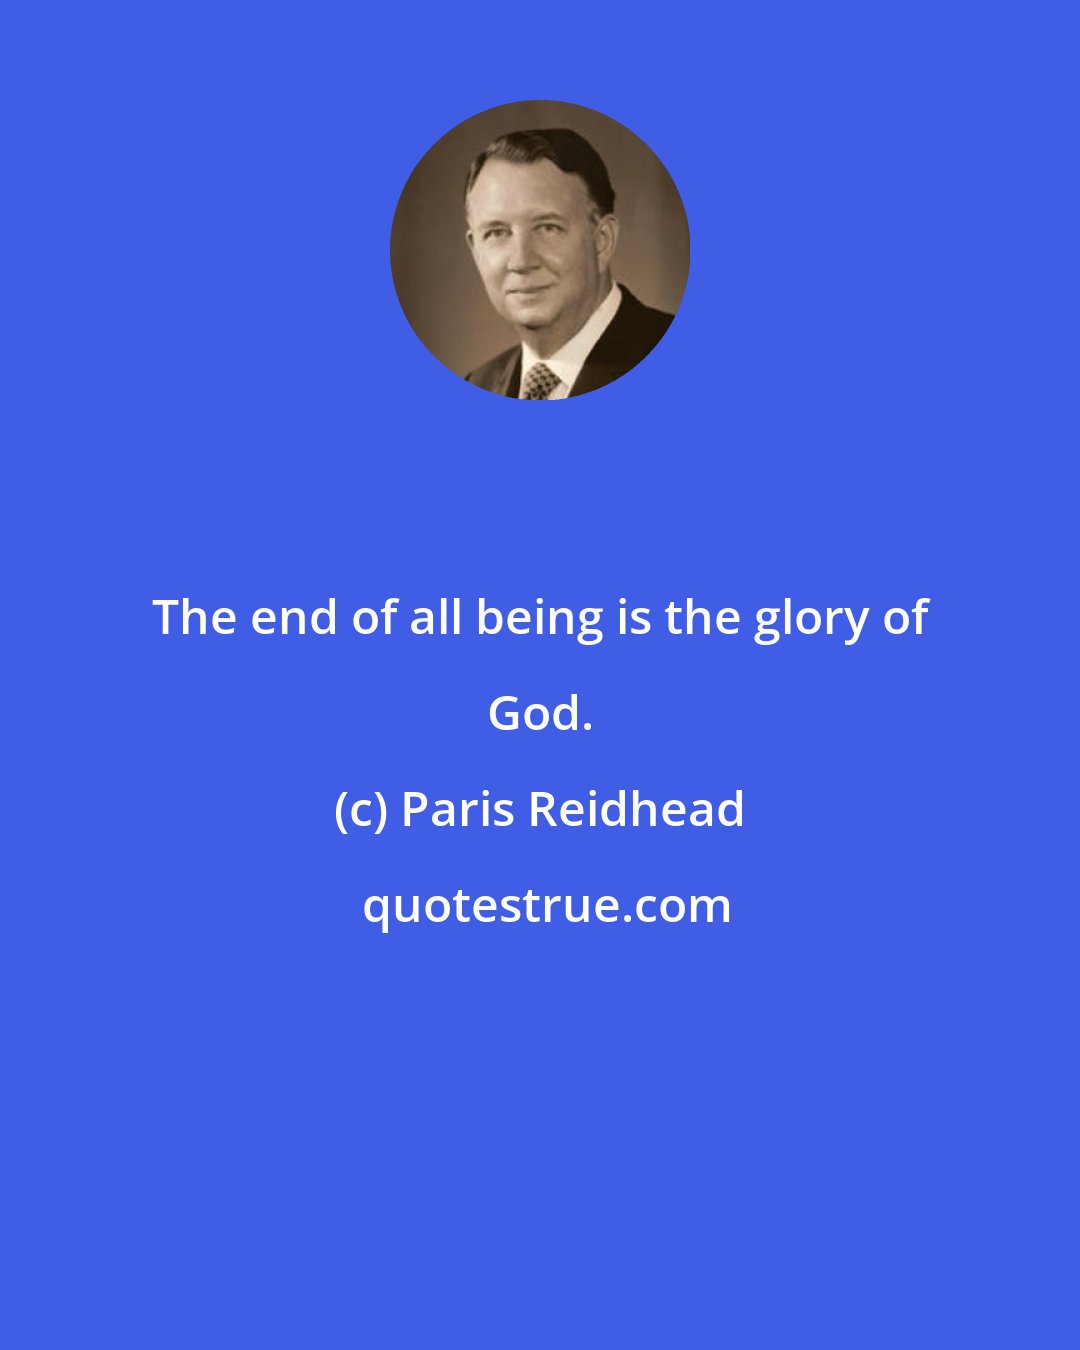 Paris Reidhead: The end of all being is the glory of God.